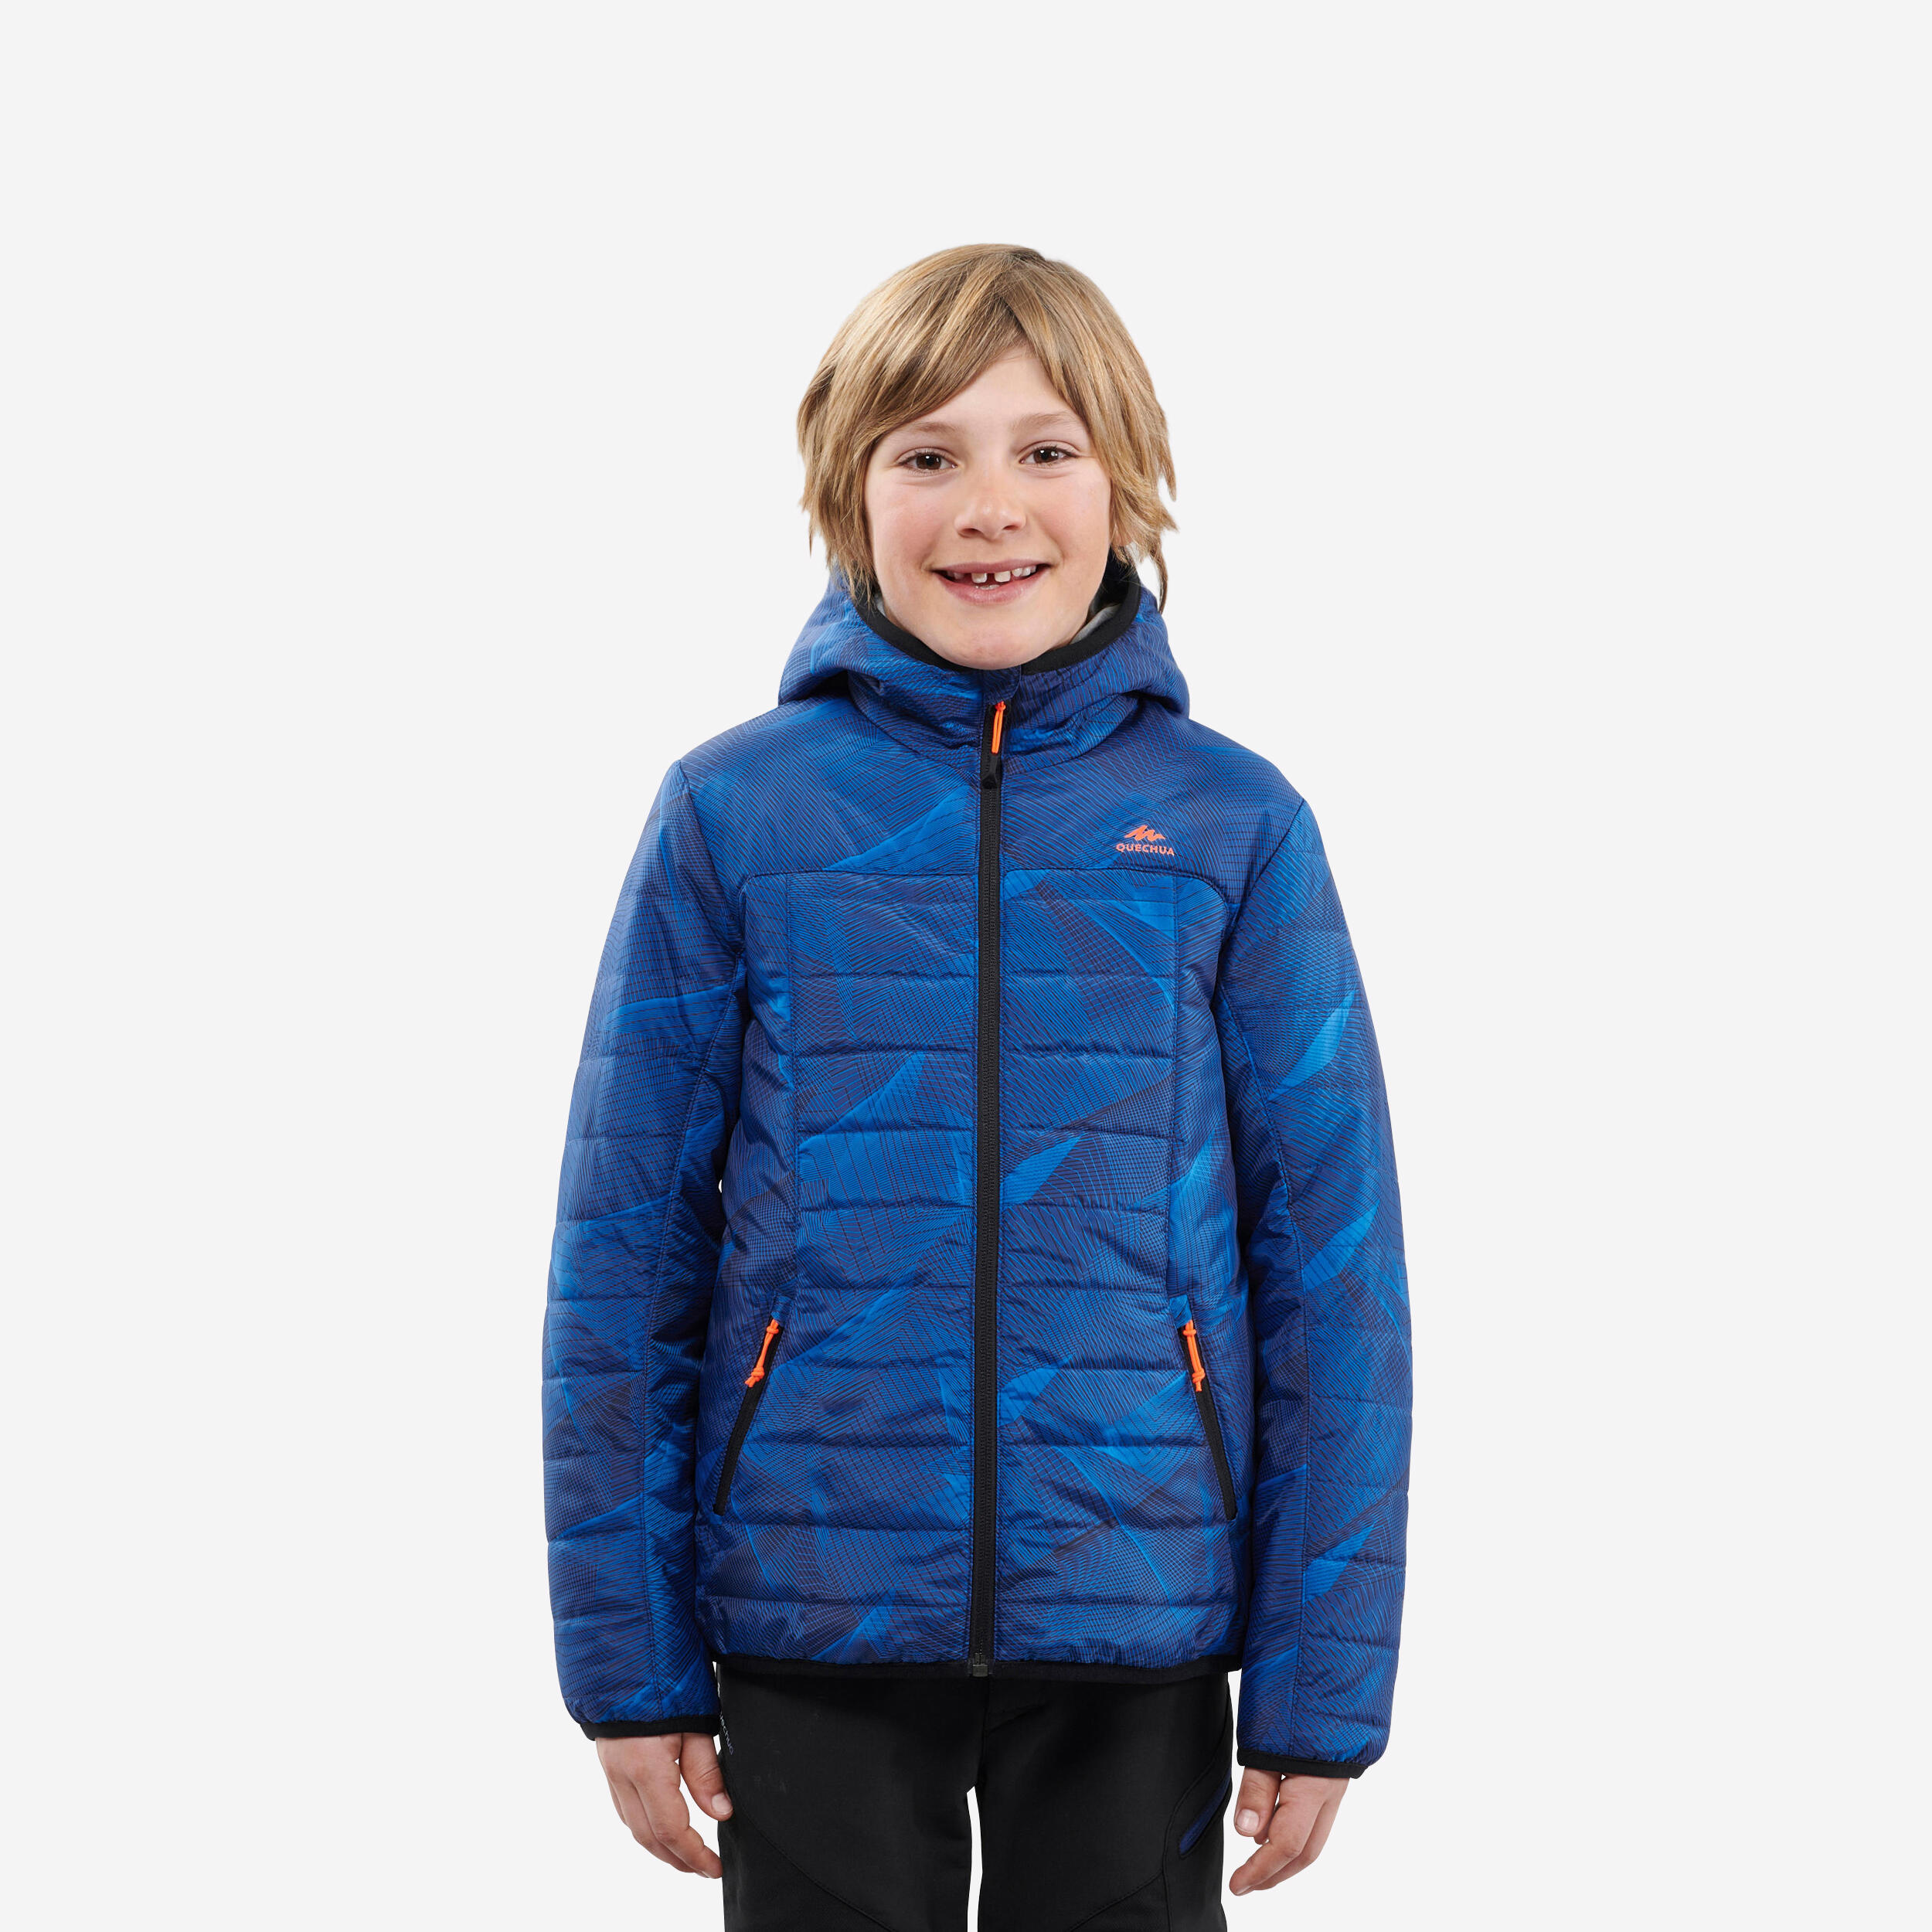 Quechua Kids’ Padded Hiking Jacket MH500 7-15 Years - Blue